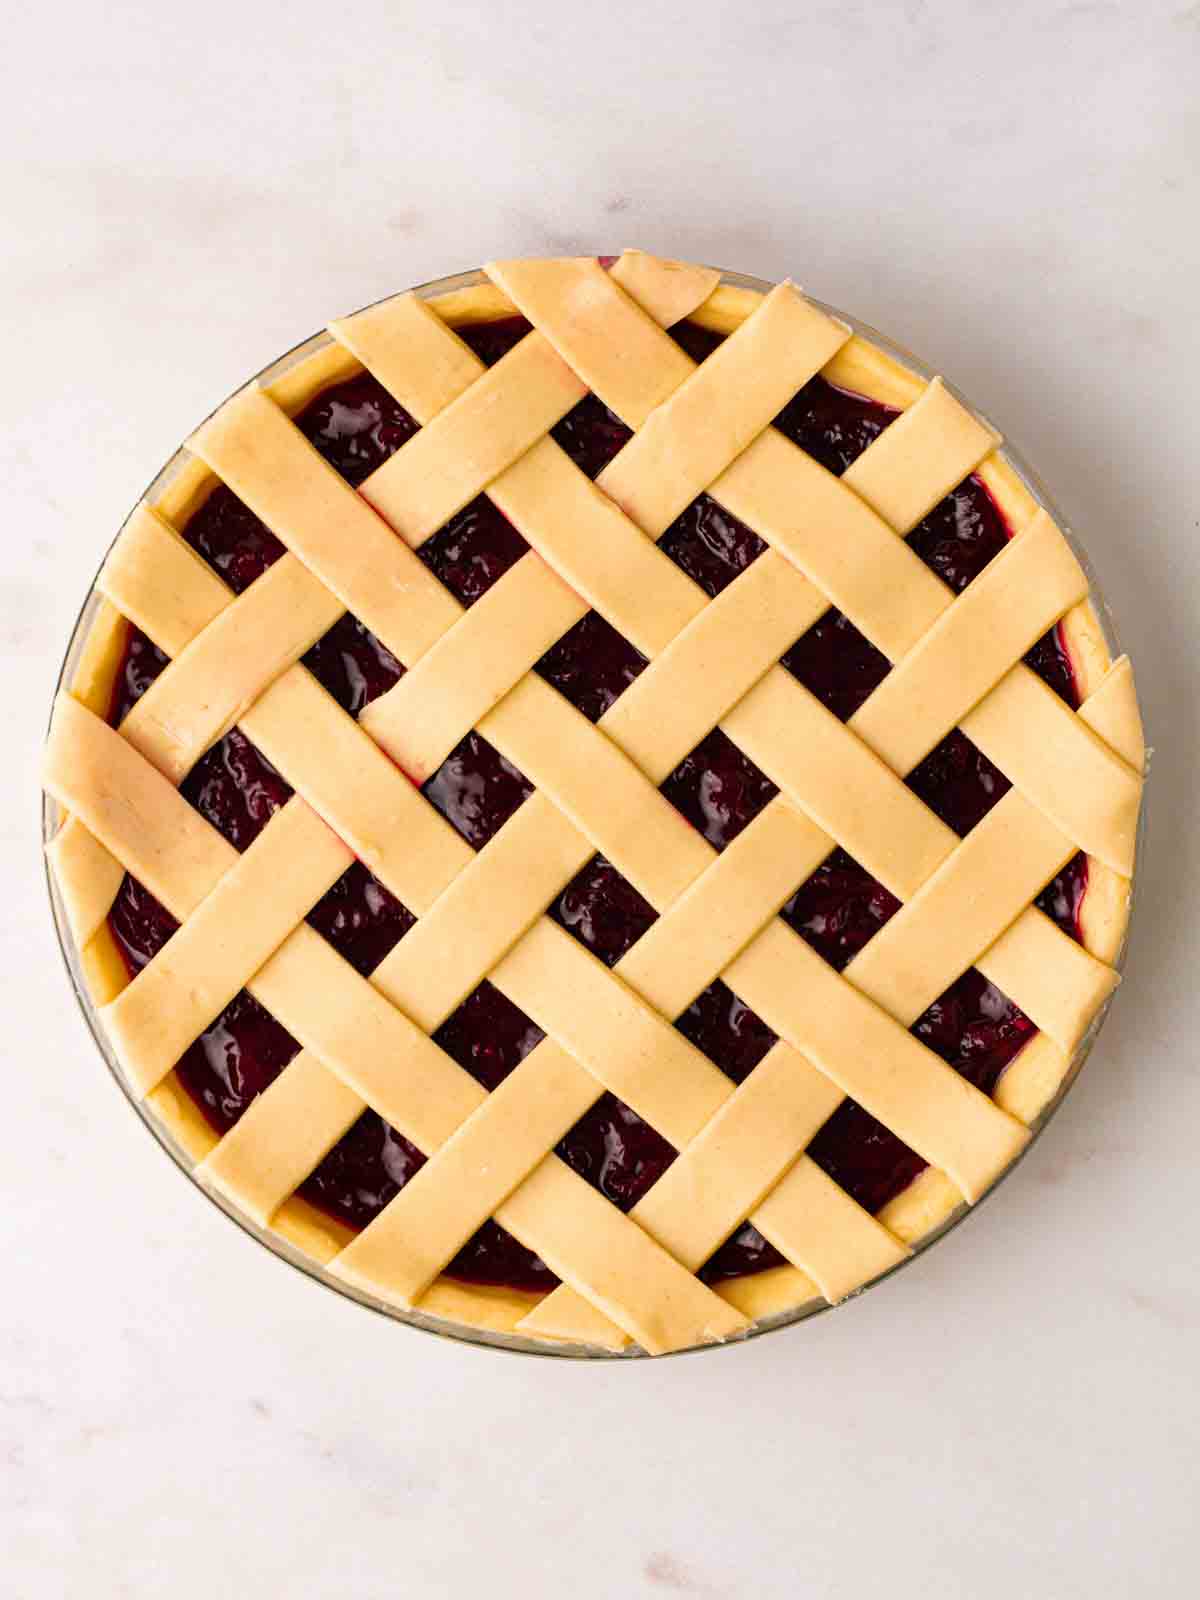 An uncooked cherry pie with a lattice top from a bird's eye view.